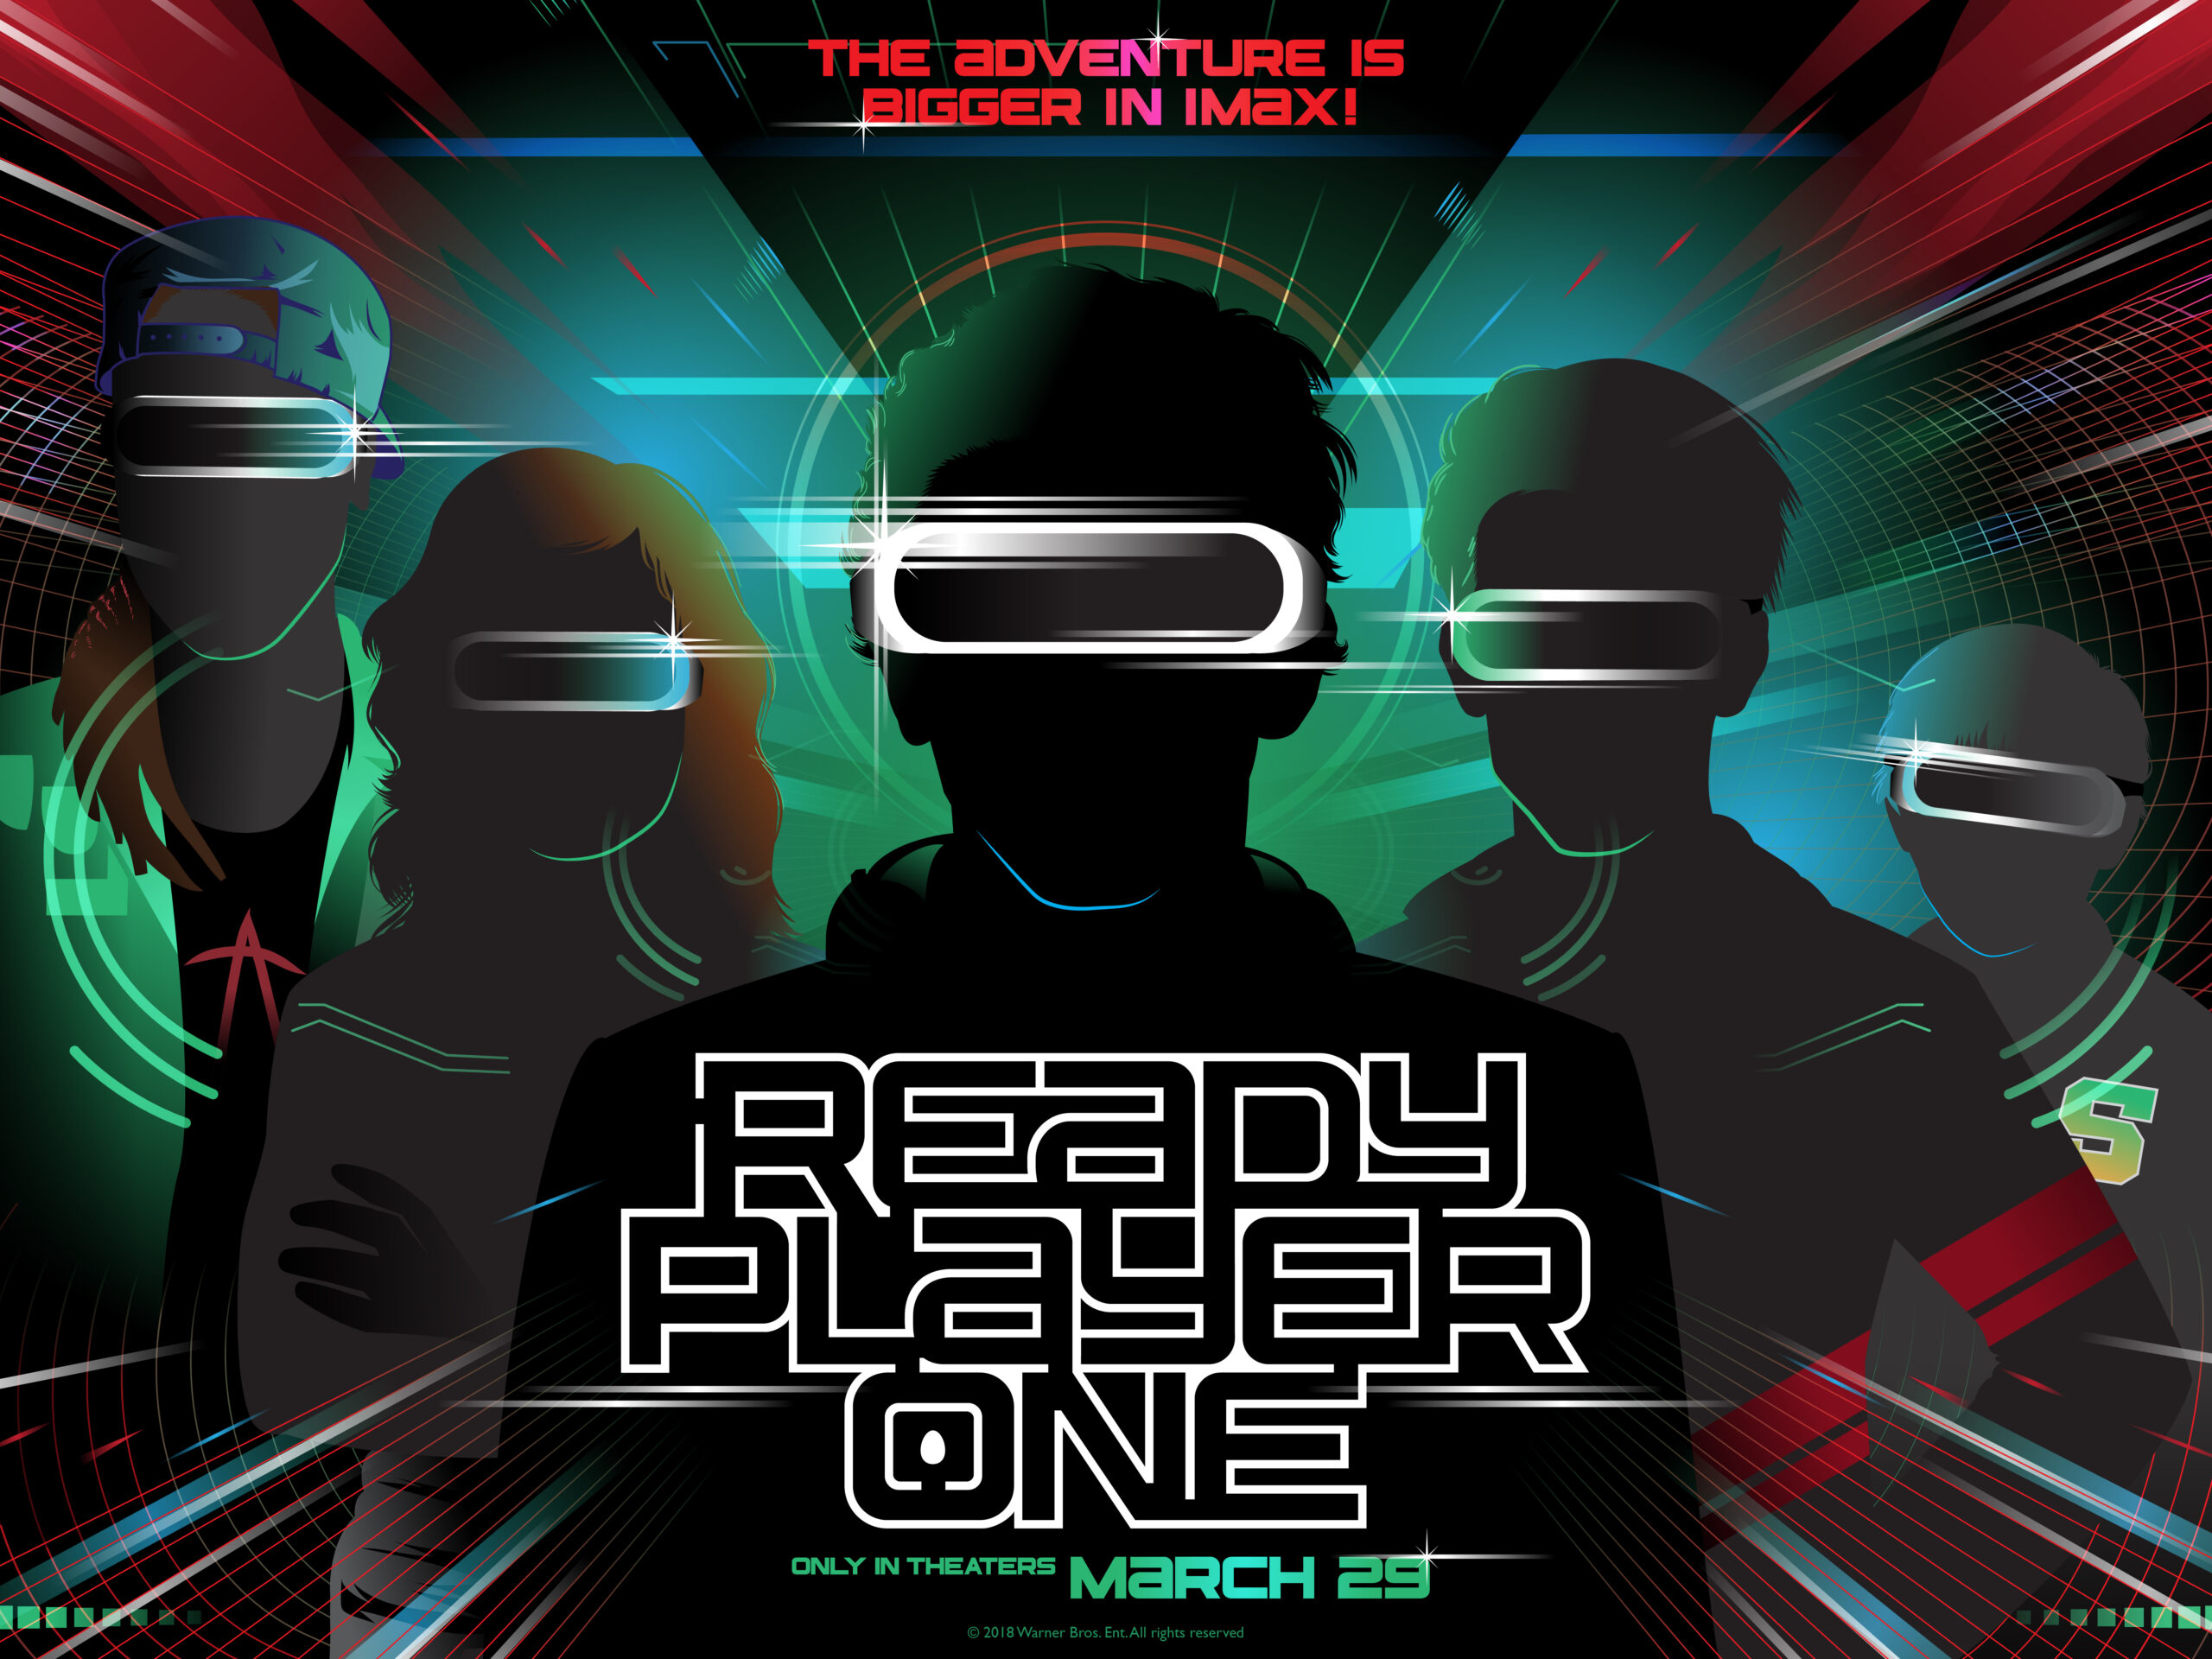 Rodolfo Reyes - Ready Player One Exclusive poster artwork